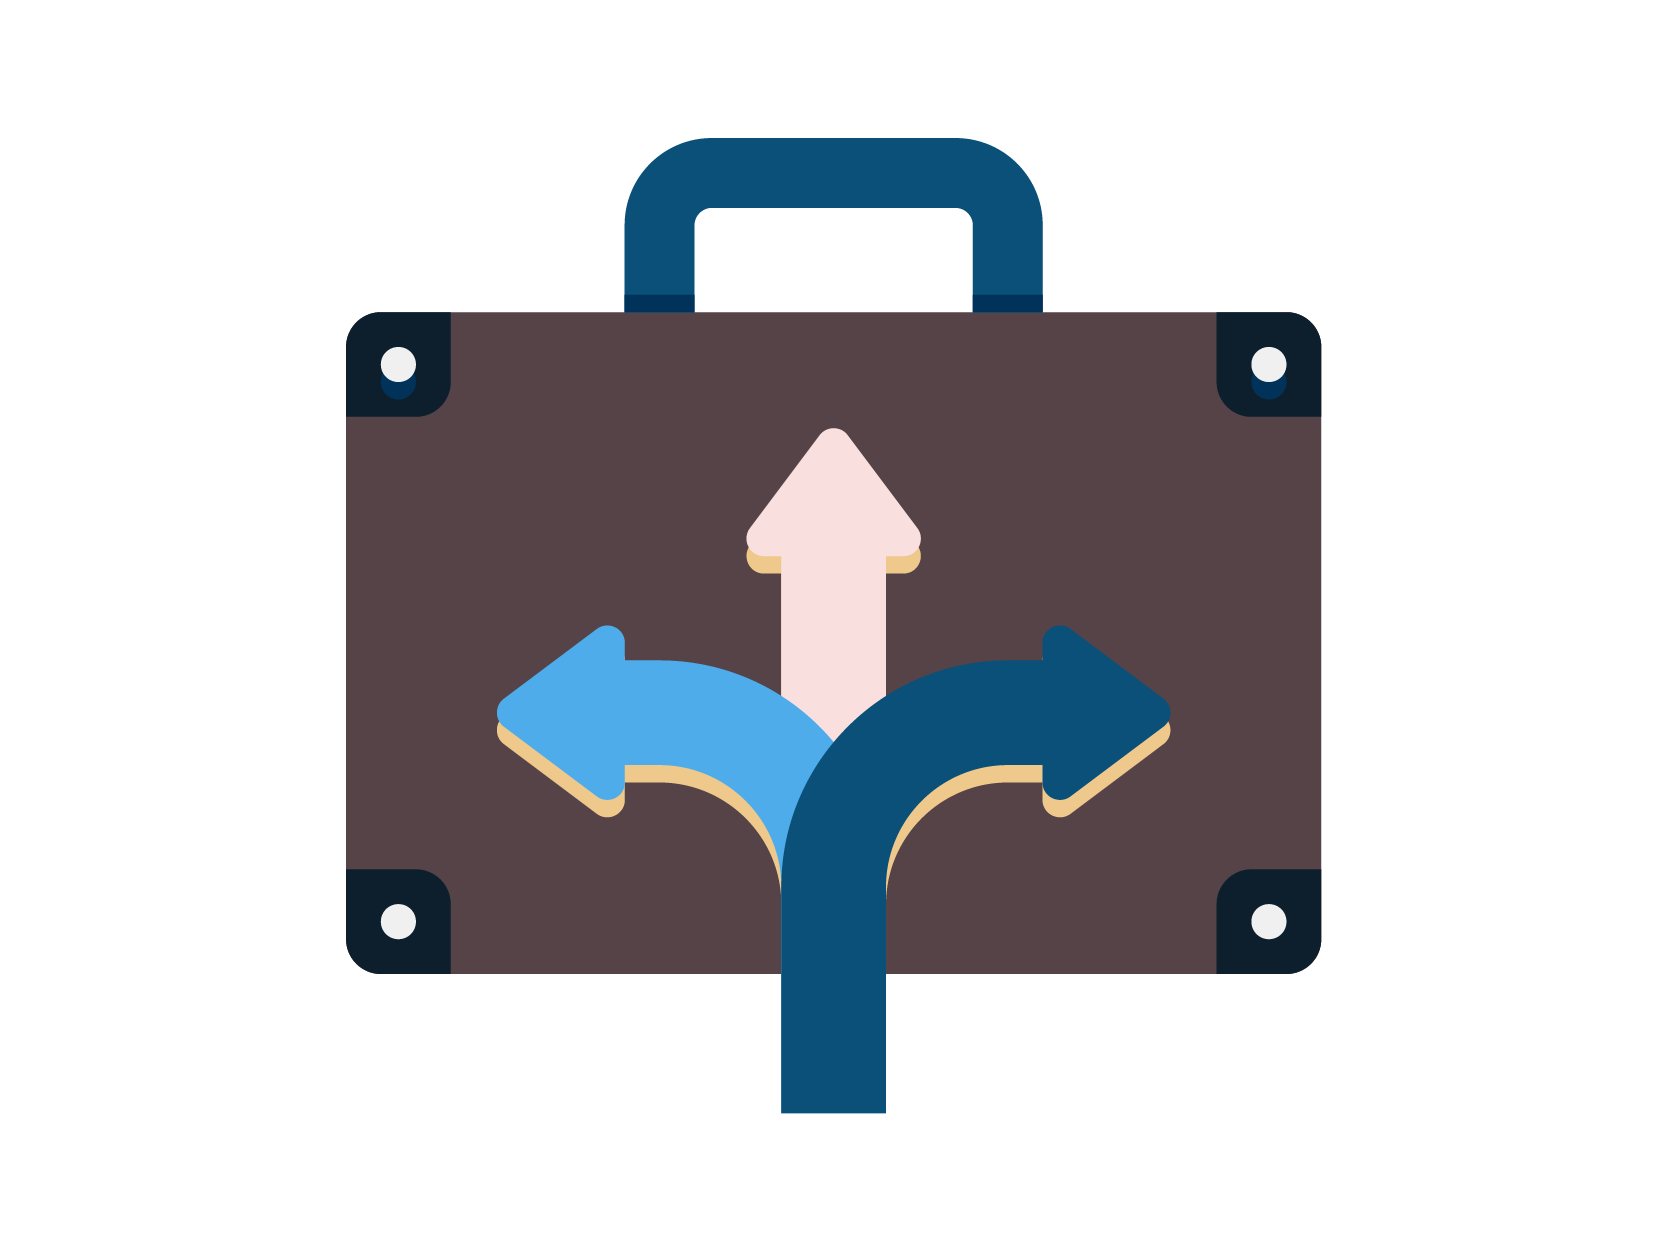 Arrows splitting into three separate directions above a brown suitcase